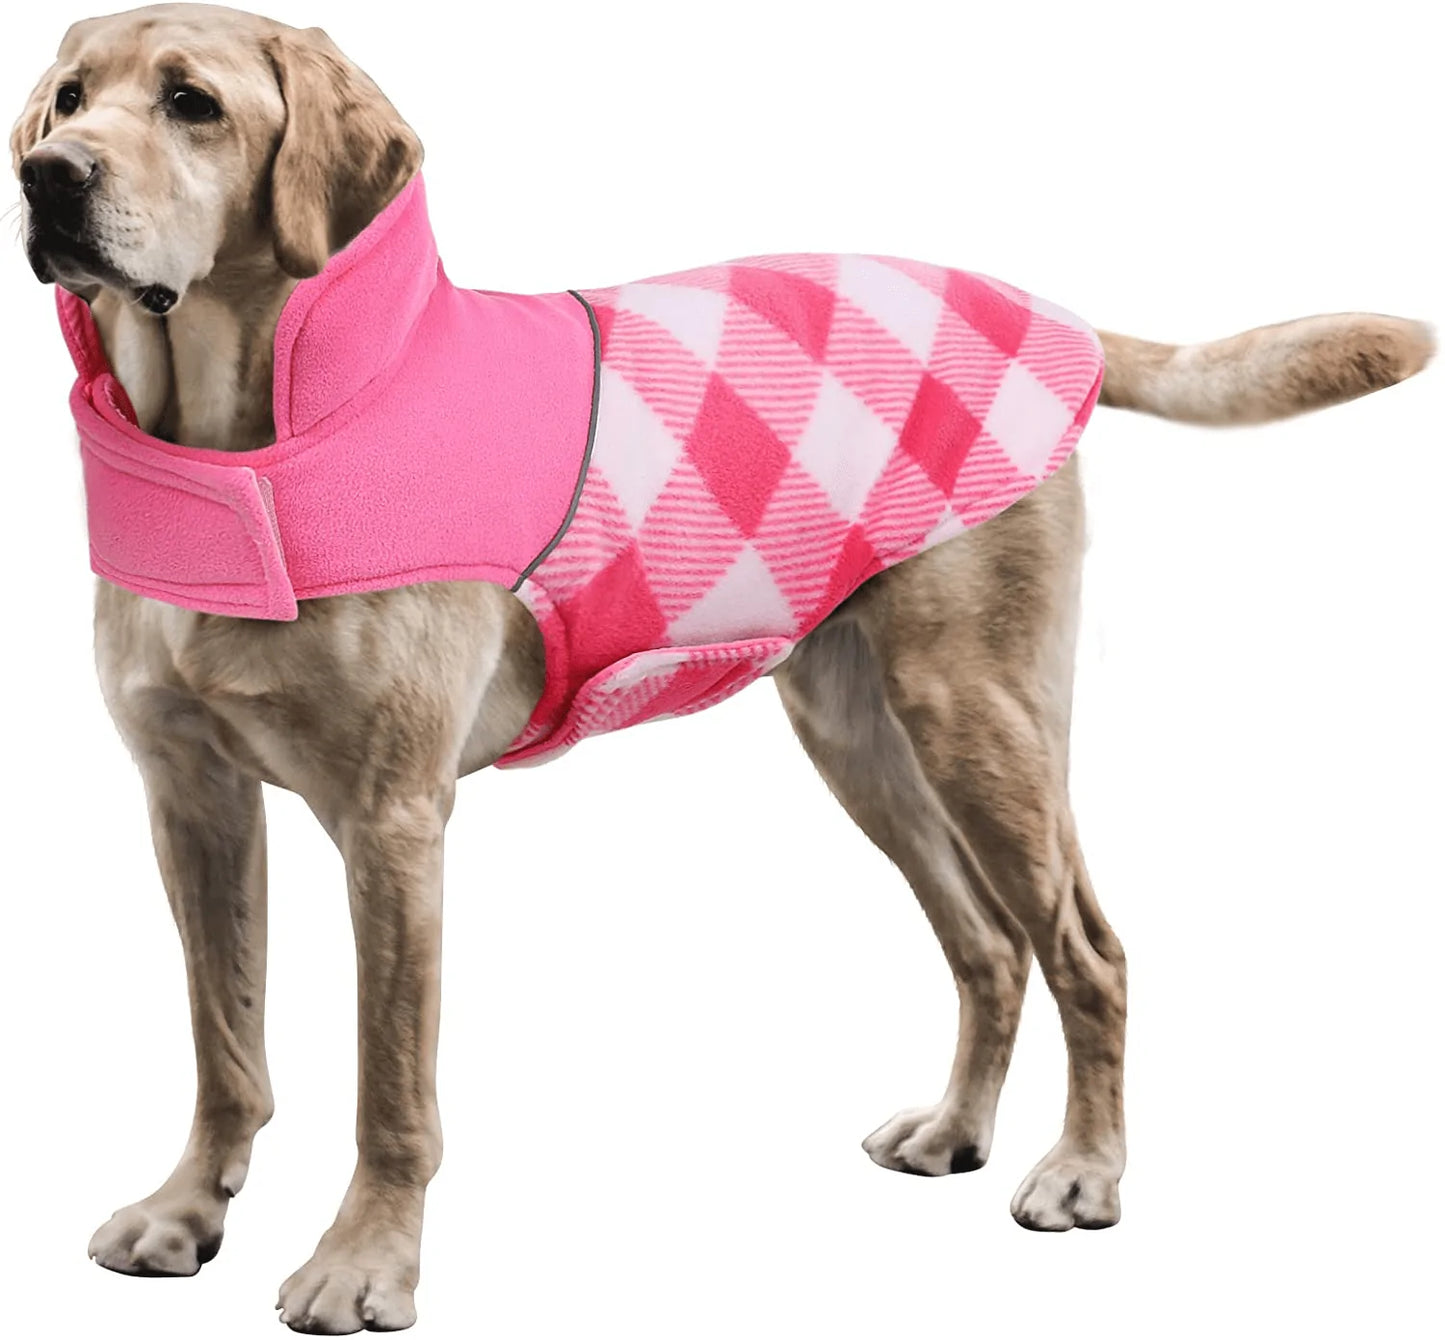 ASENKU Dog Winter Coat, Reversible Plaid Pet Jacket, Waterproof Windproof Reflective Puppy Clothes for Cold Weather, Comfortable Outdoor & Indoor Apparel, Warm Cozy Vest for Small Medium Large Dogs Animals & Pet Supplies > Pet Supplies > Dog Supplies > Dog Apparel ASENKU Pink XL: Chest Girth (24.80"-29.53") 